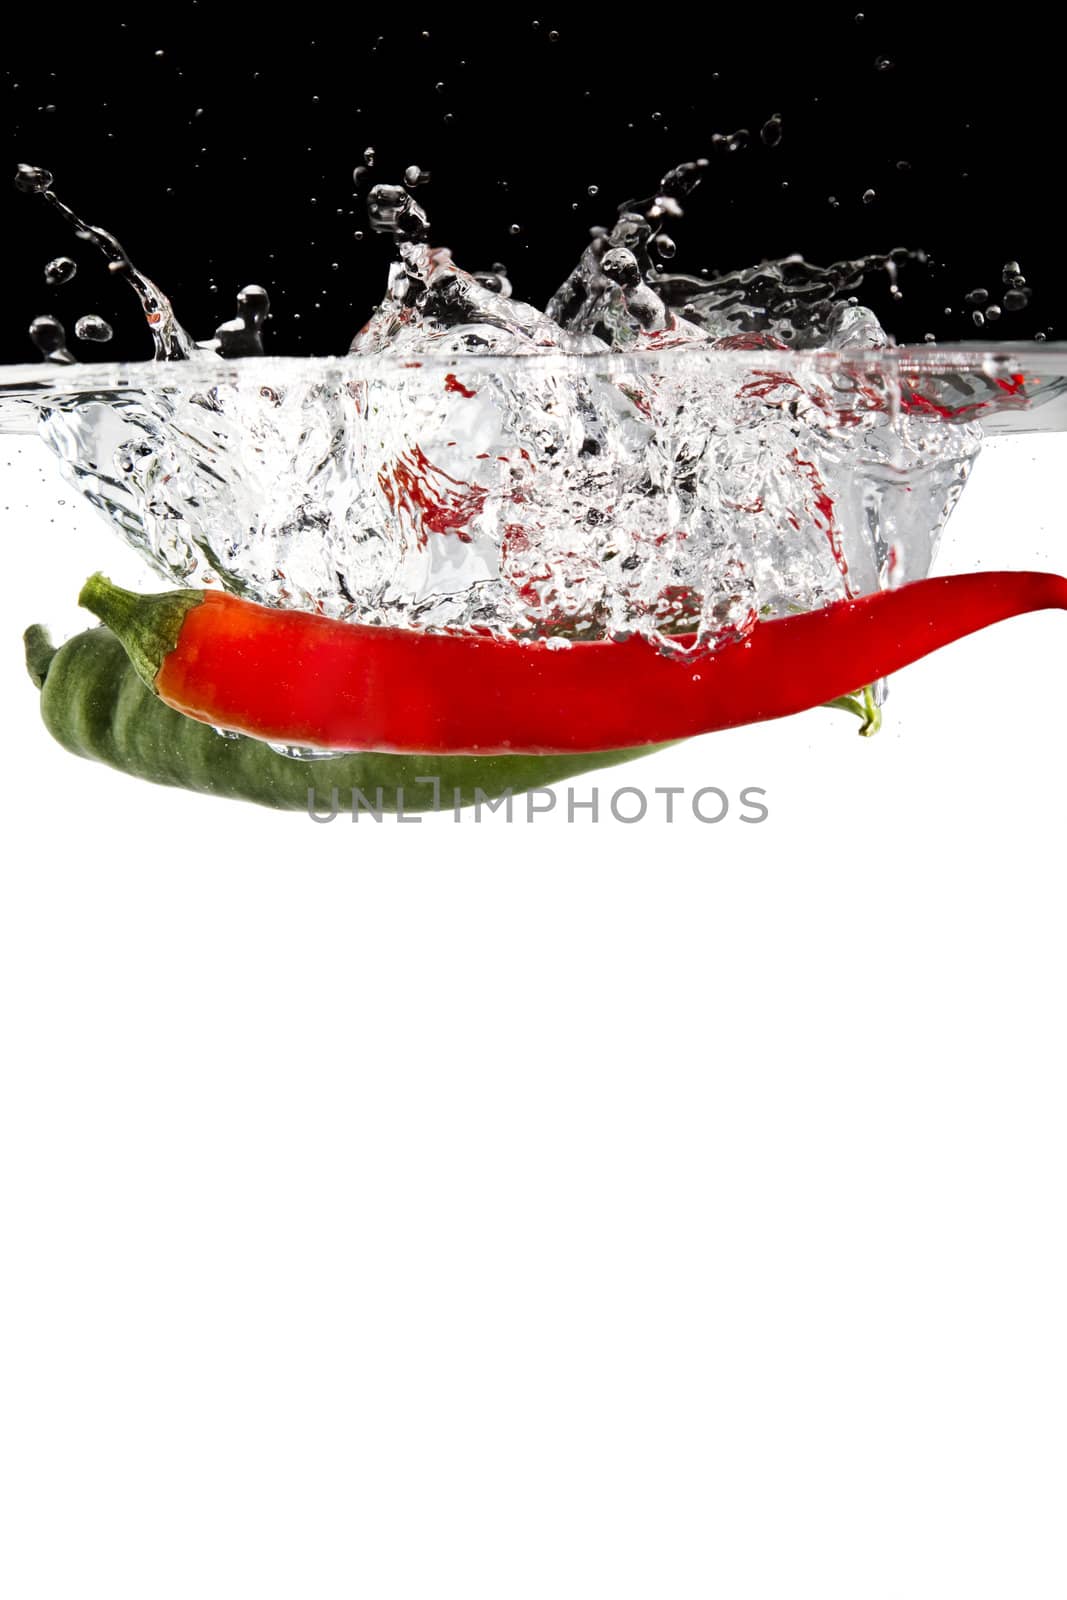 red and green chilli thrown in water with black and white background